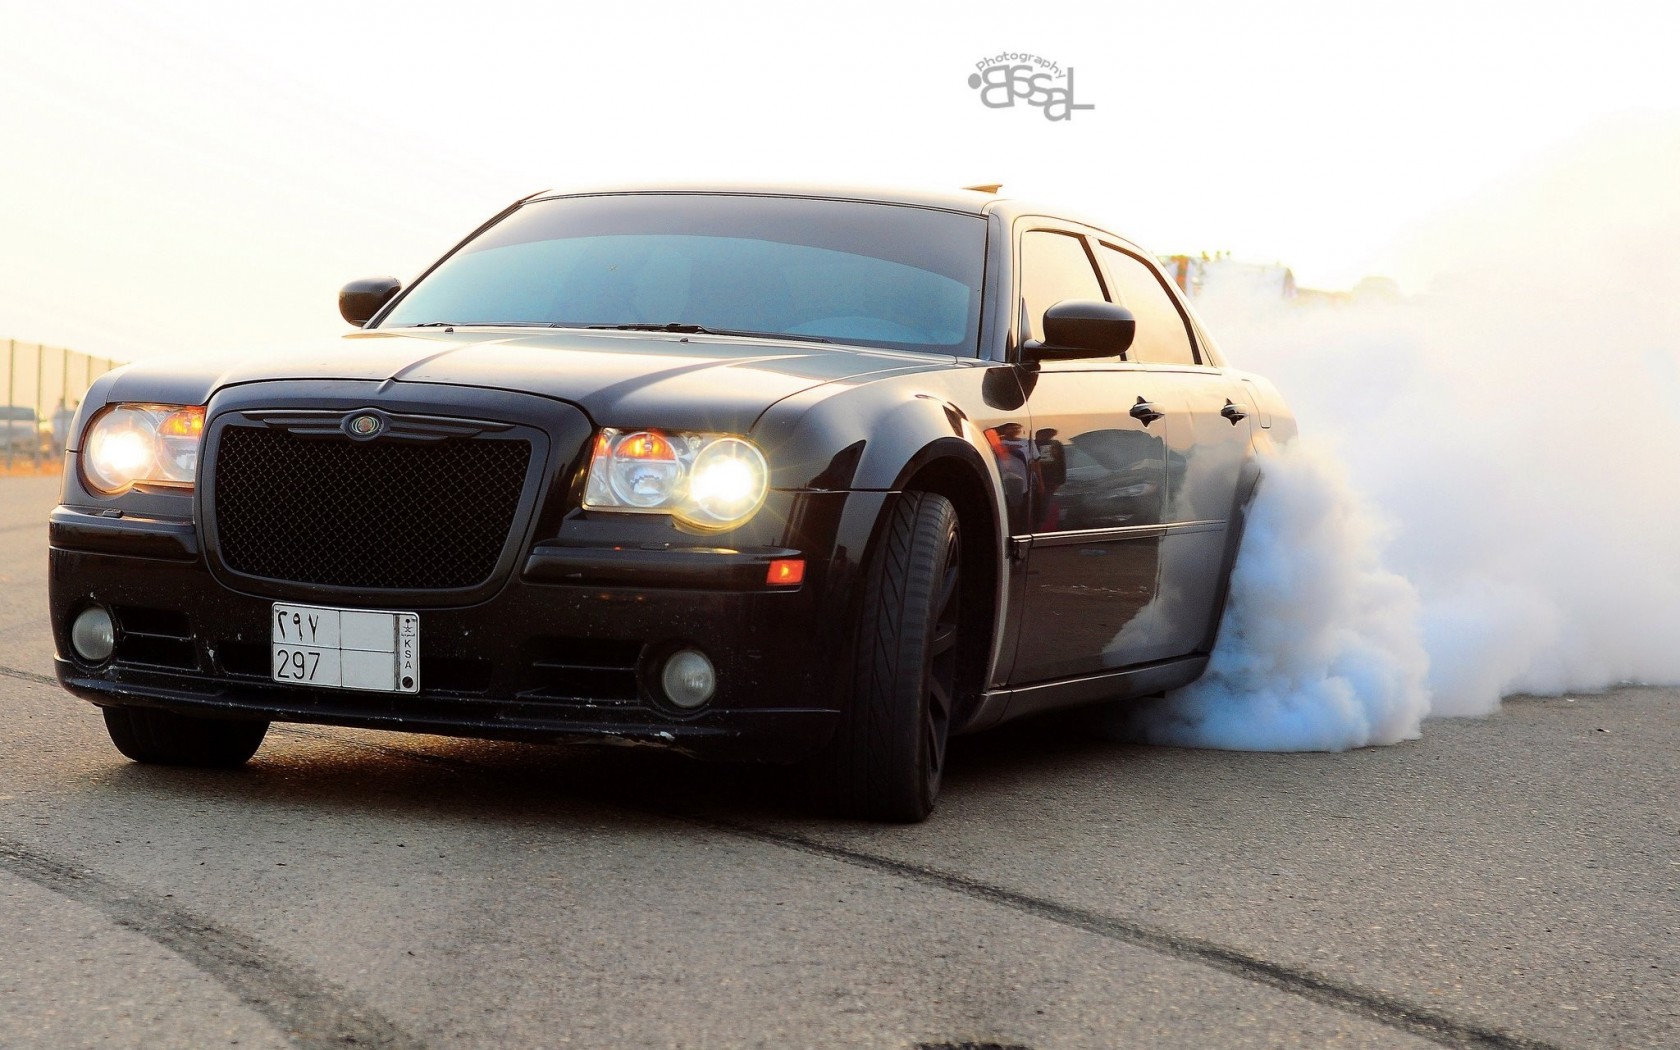 Chrysler 300 Price, Specs, Colors, Features -